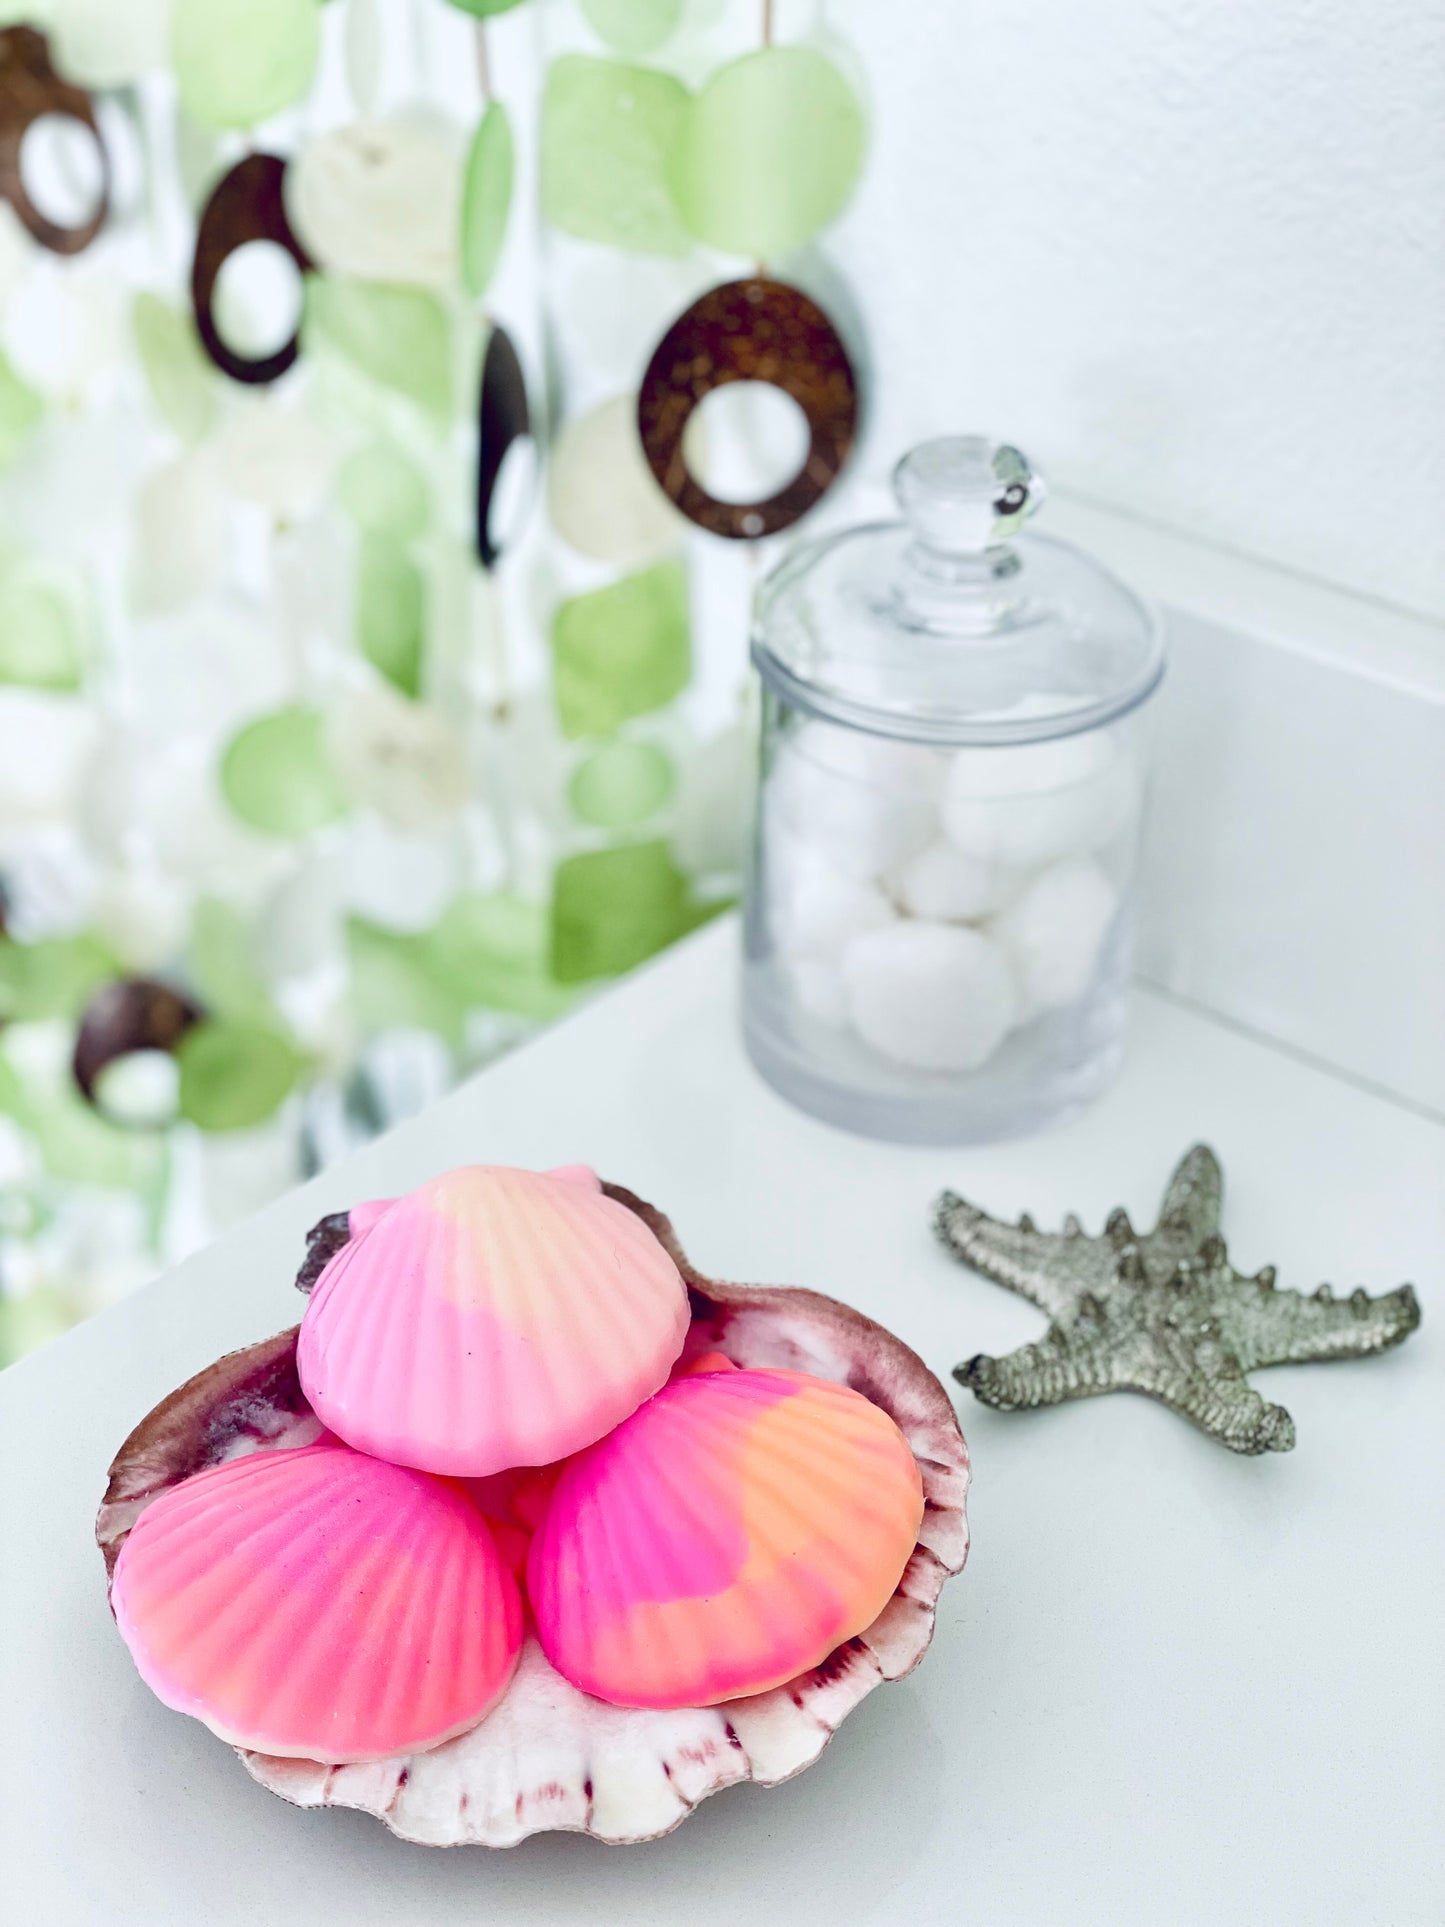 sea shell body soap handmade with shea butter and scented with hibiscus essential oil